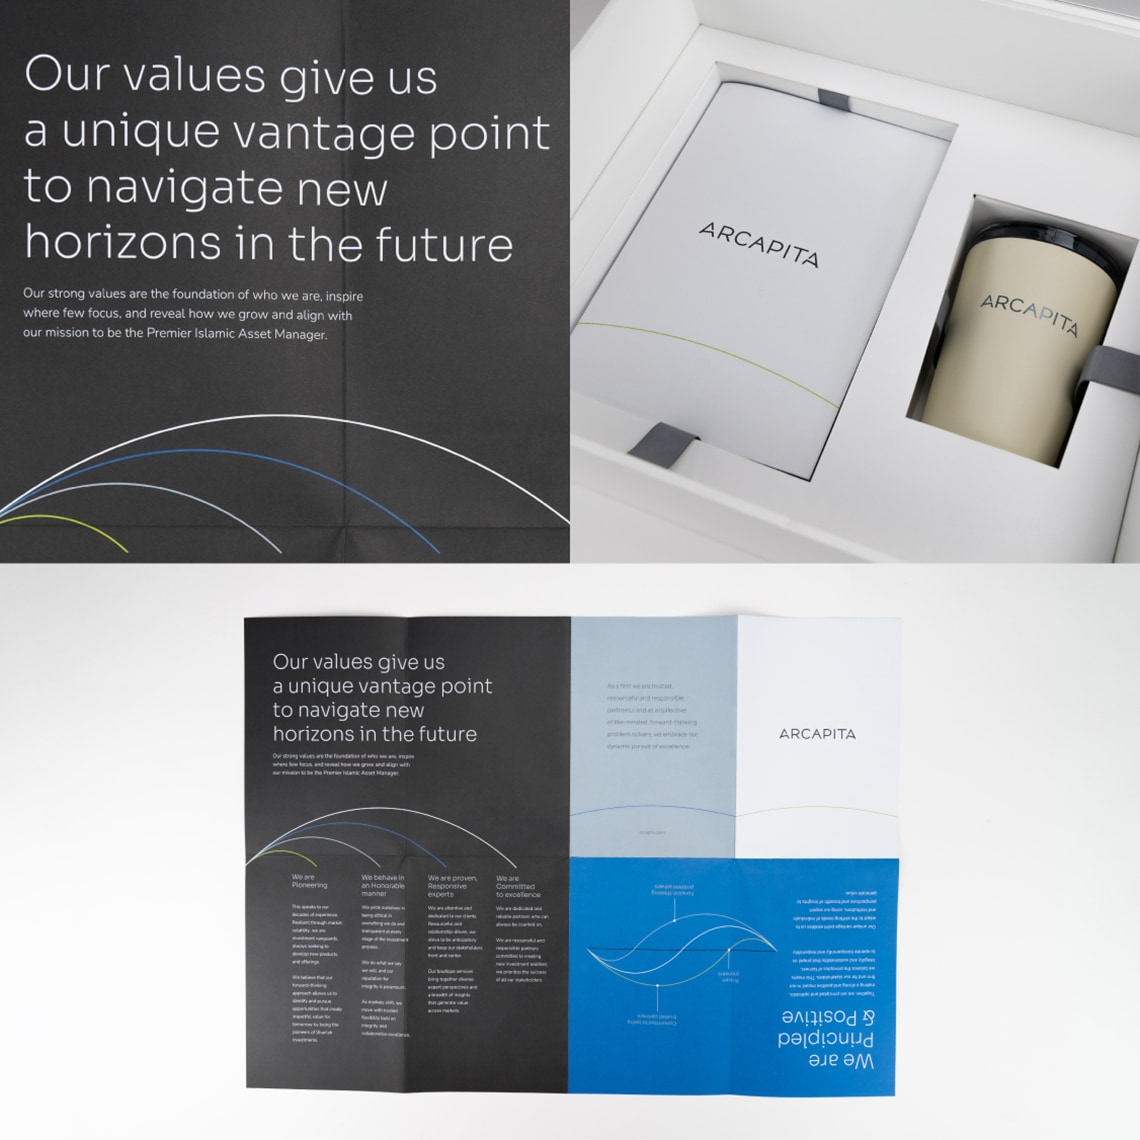 MBLM created employee kits to be used as an orientation gift, acknowledging their vital role in Arcapita’s transformation